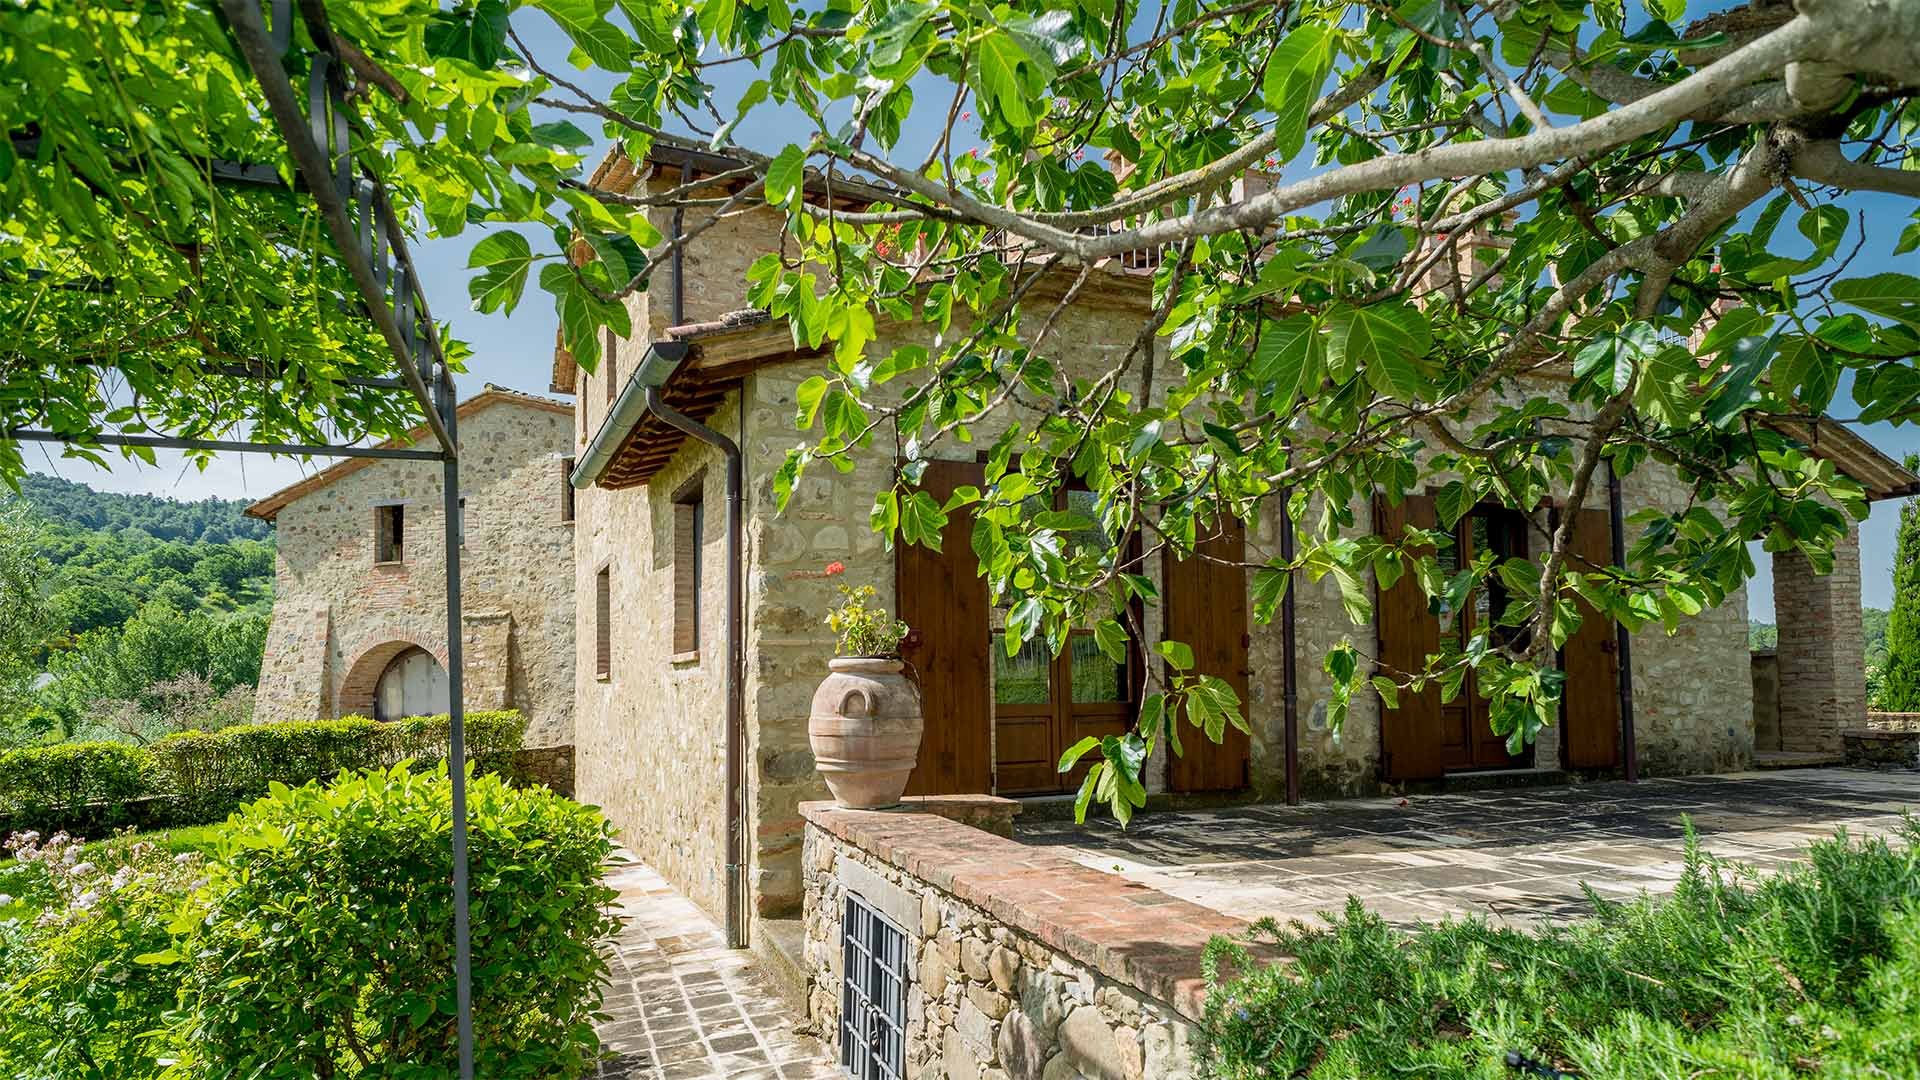 Francis York Ancient Hamlet For Sale Near the Border of Tuscany and Umbria 12.jpg